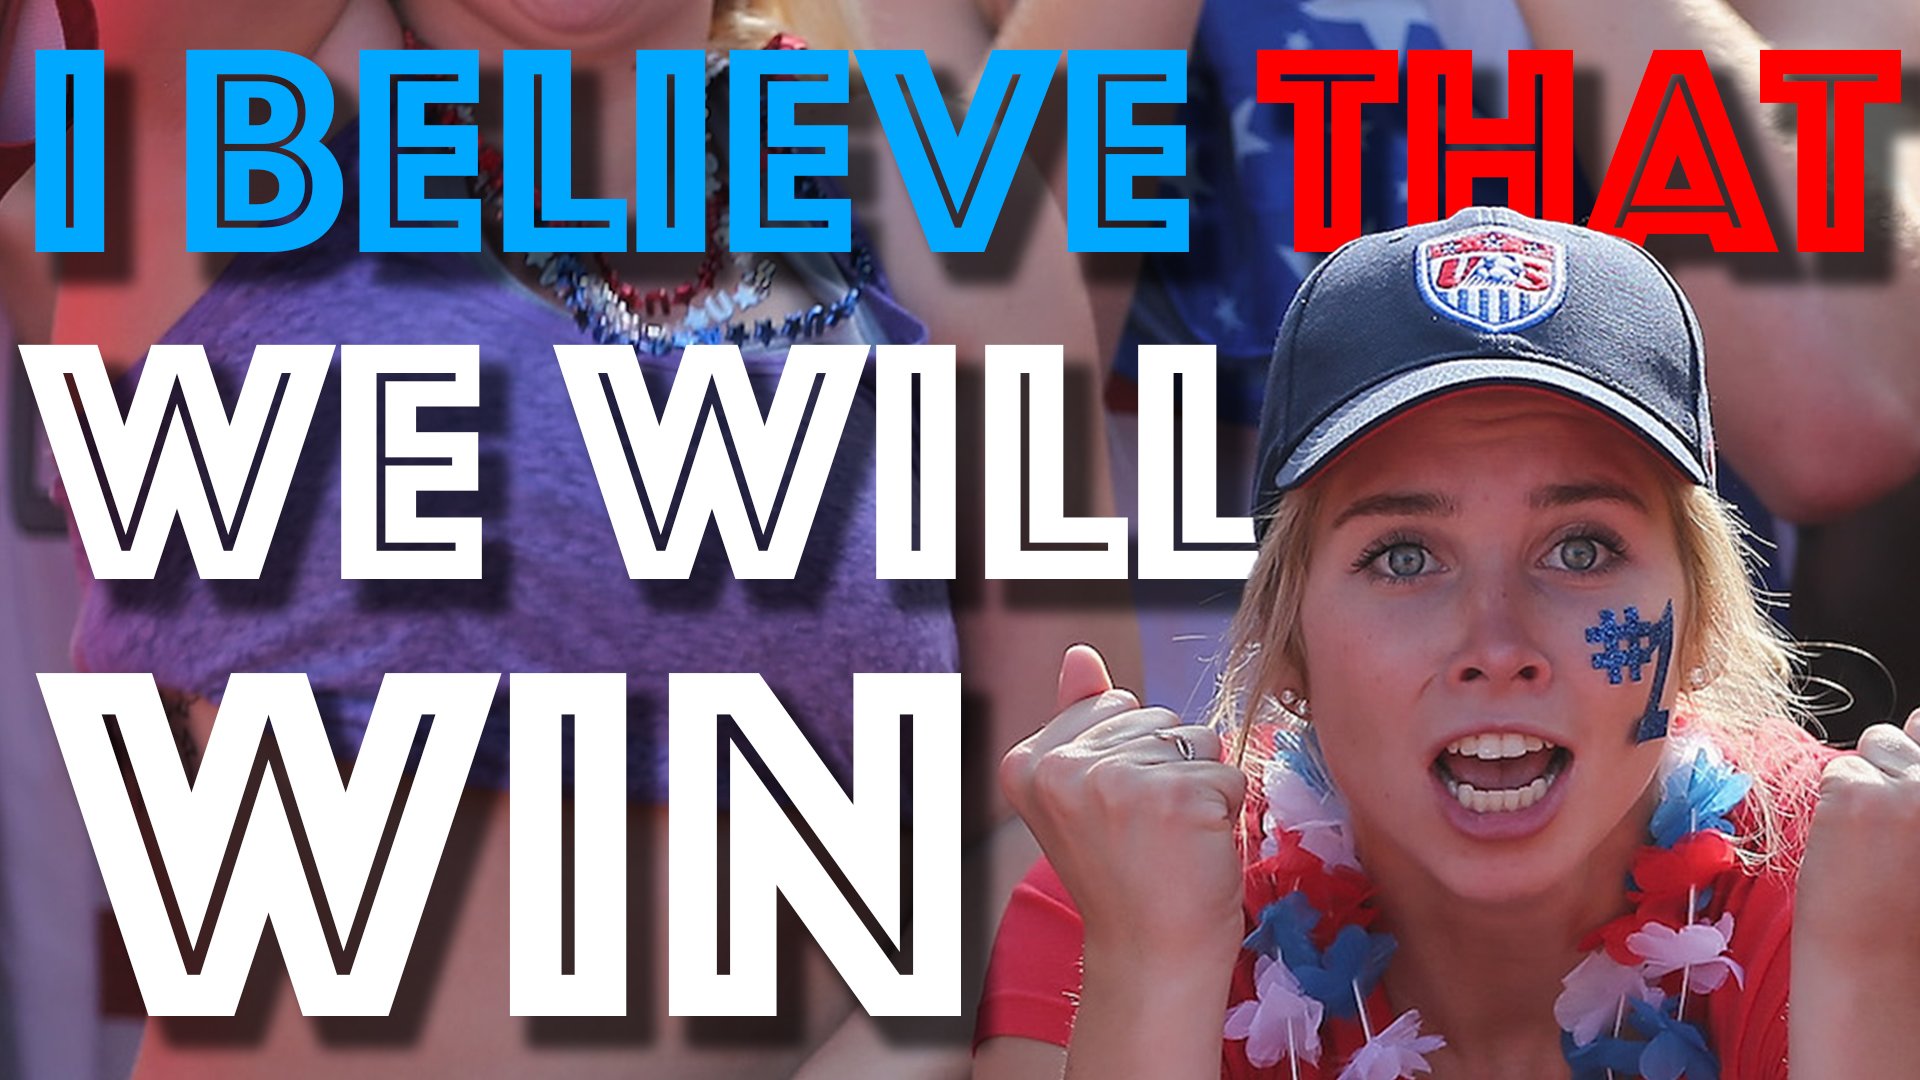 I believe that we will win cheer USMNT FIFA World Cup